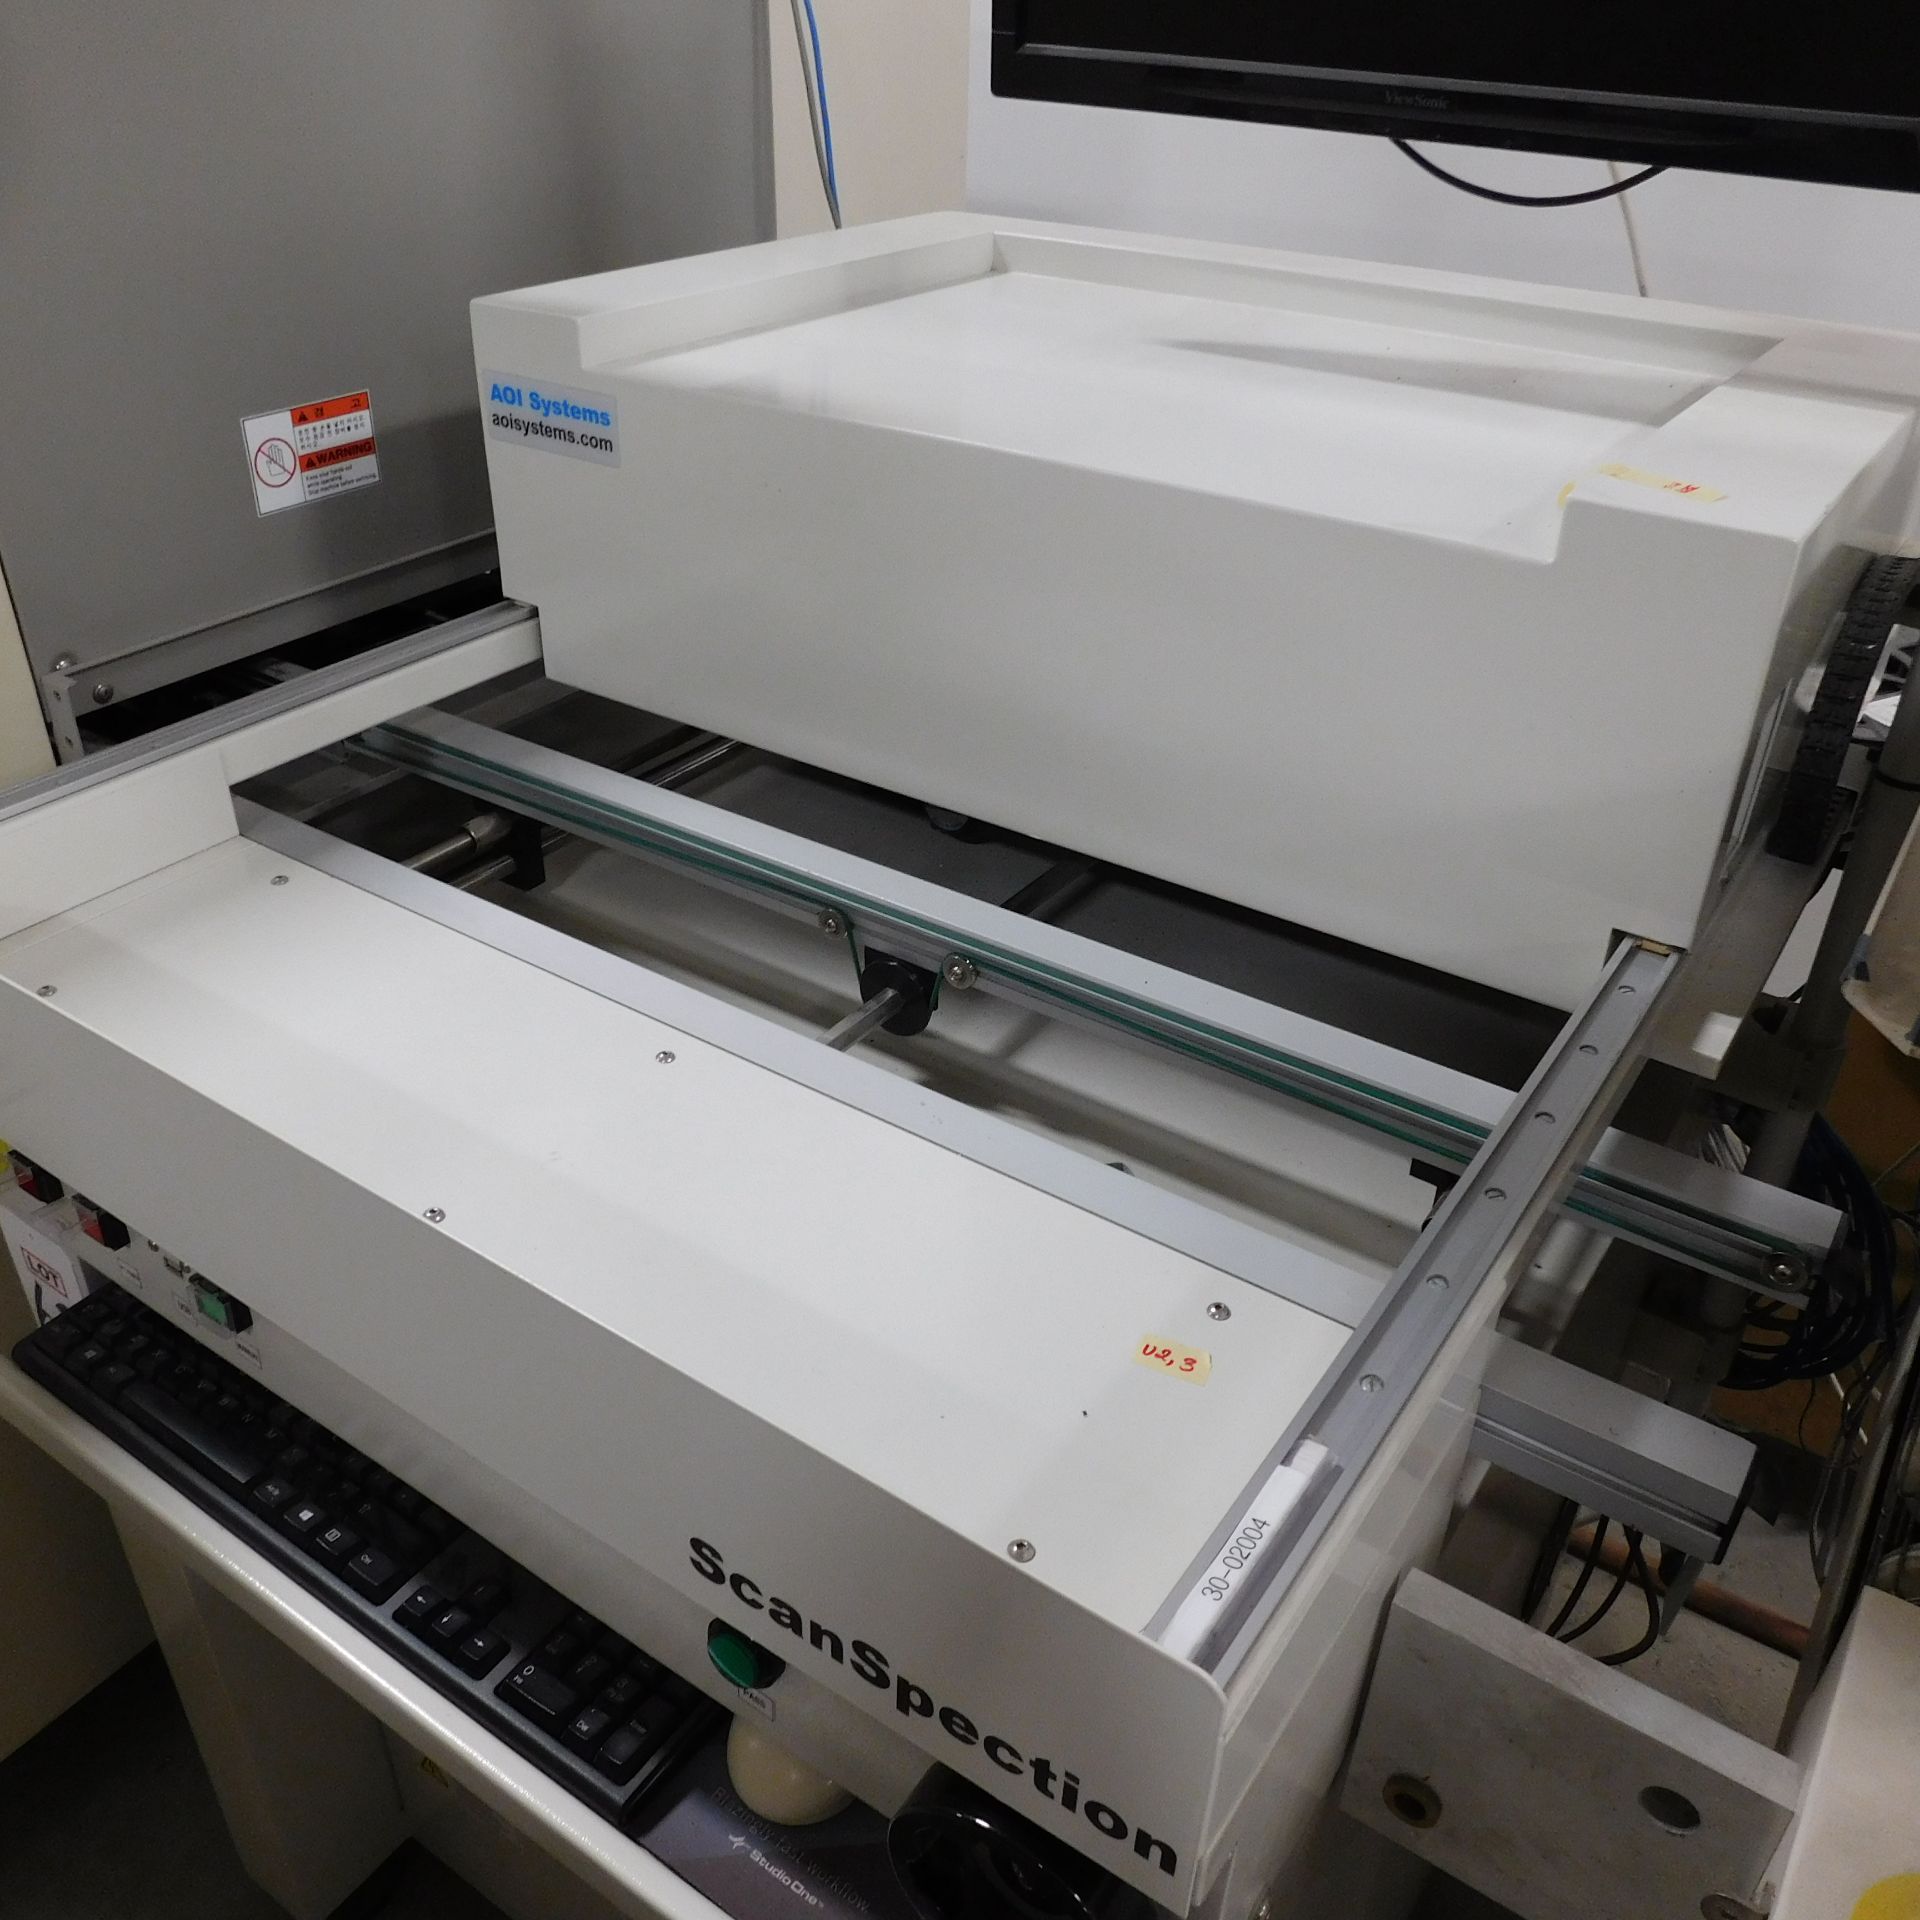 2014 AOI SYSTEMS SCANSPECTION SYSTEM SS15000IL, MODIFIED EPSON GT20000 A3 SCANNER (600 DPI OPTICAL) - Image 4 of 5